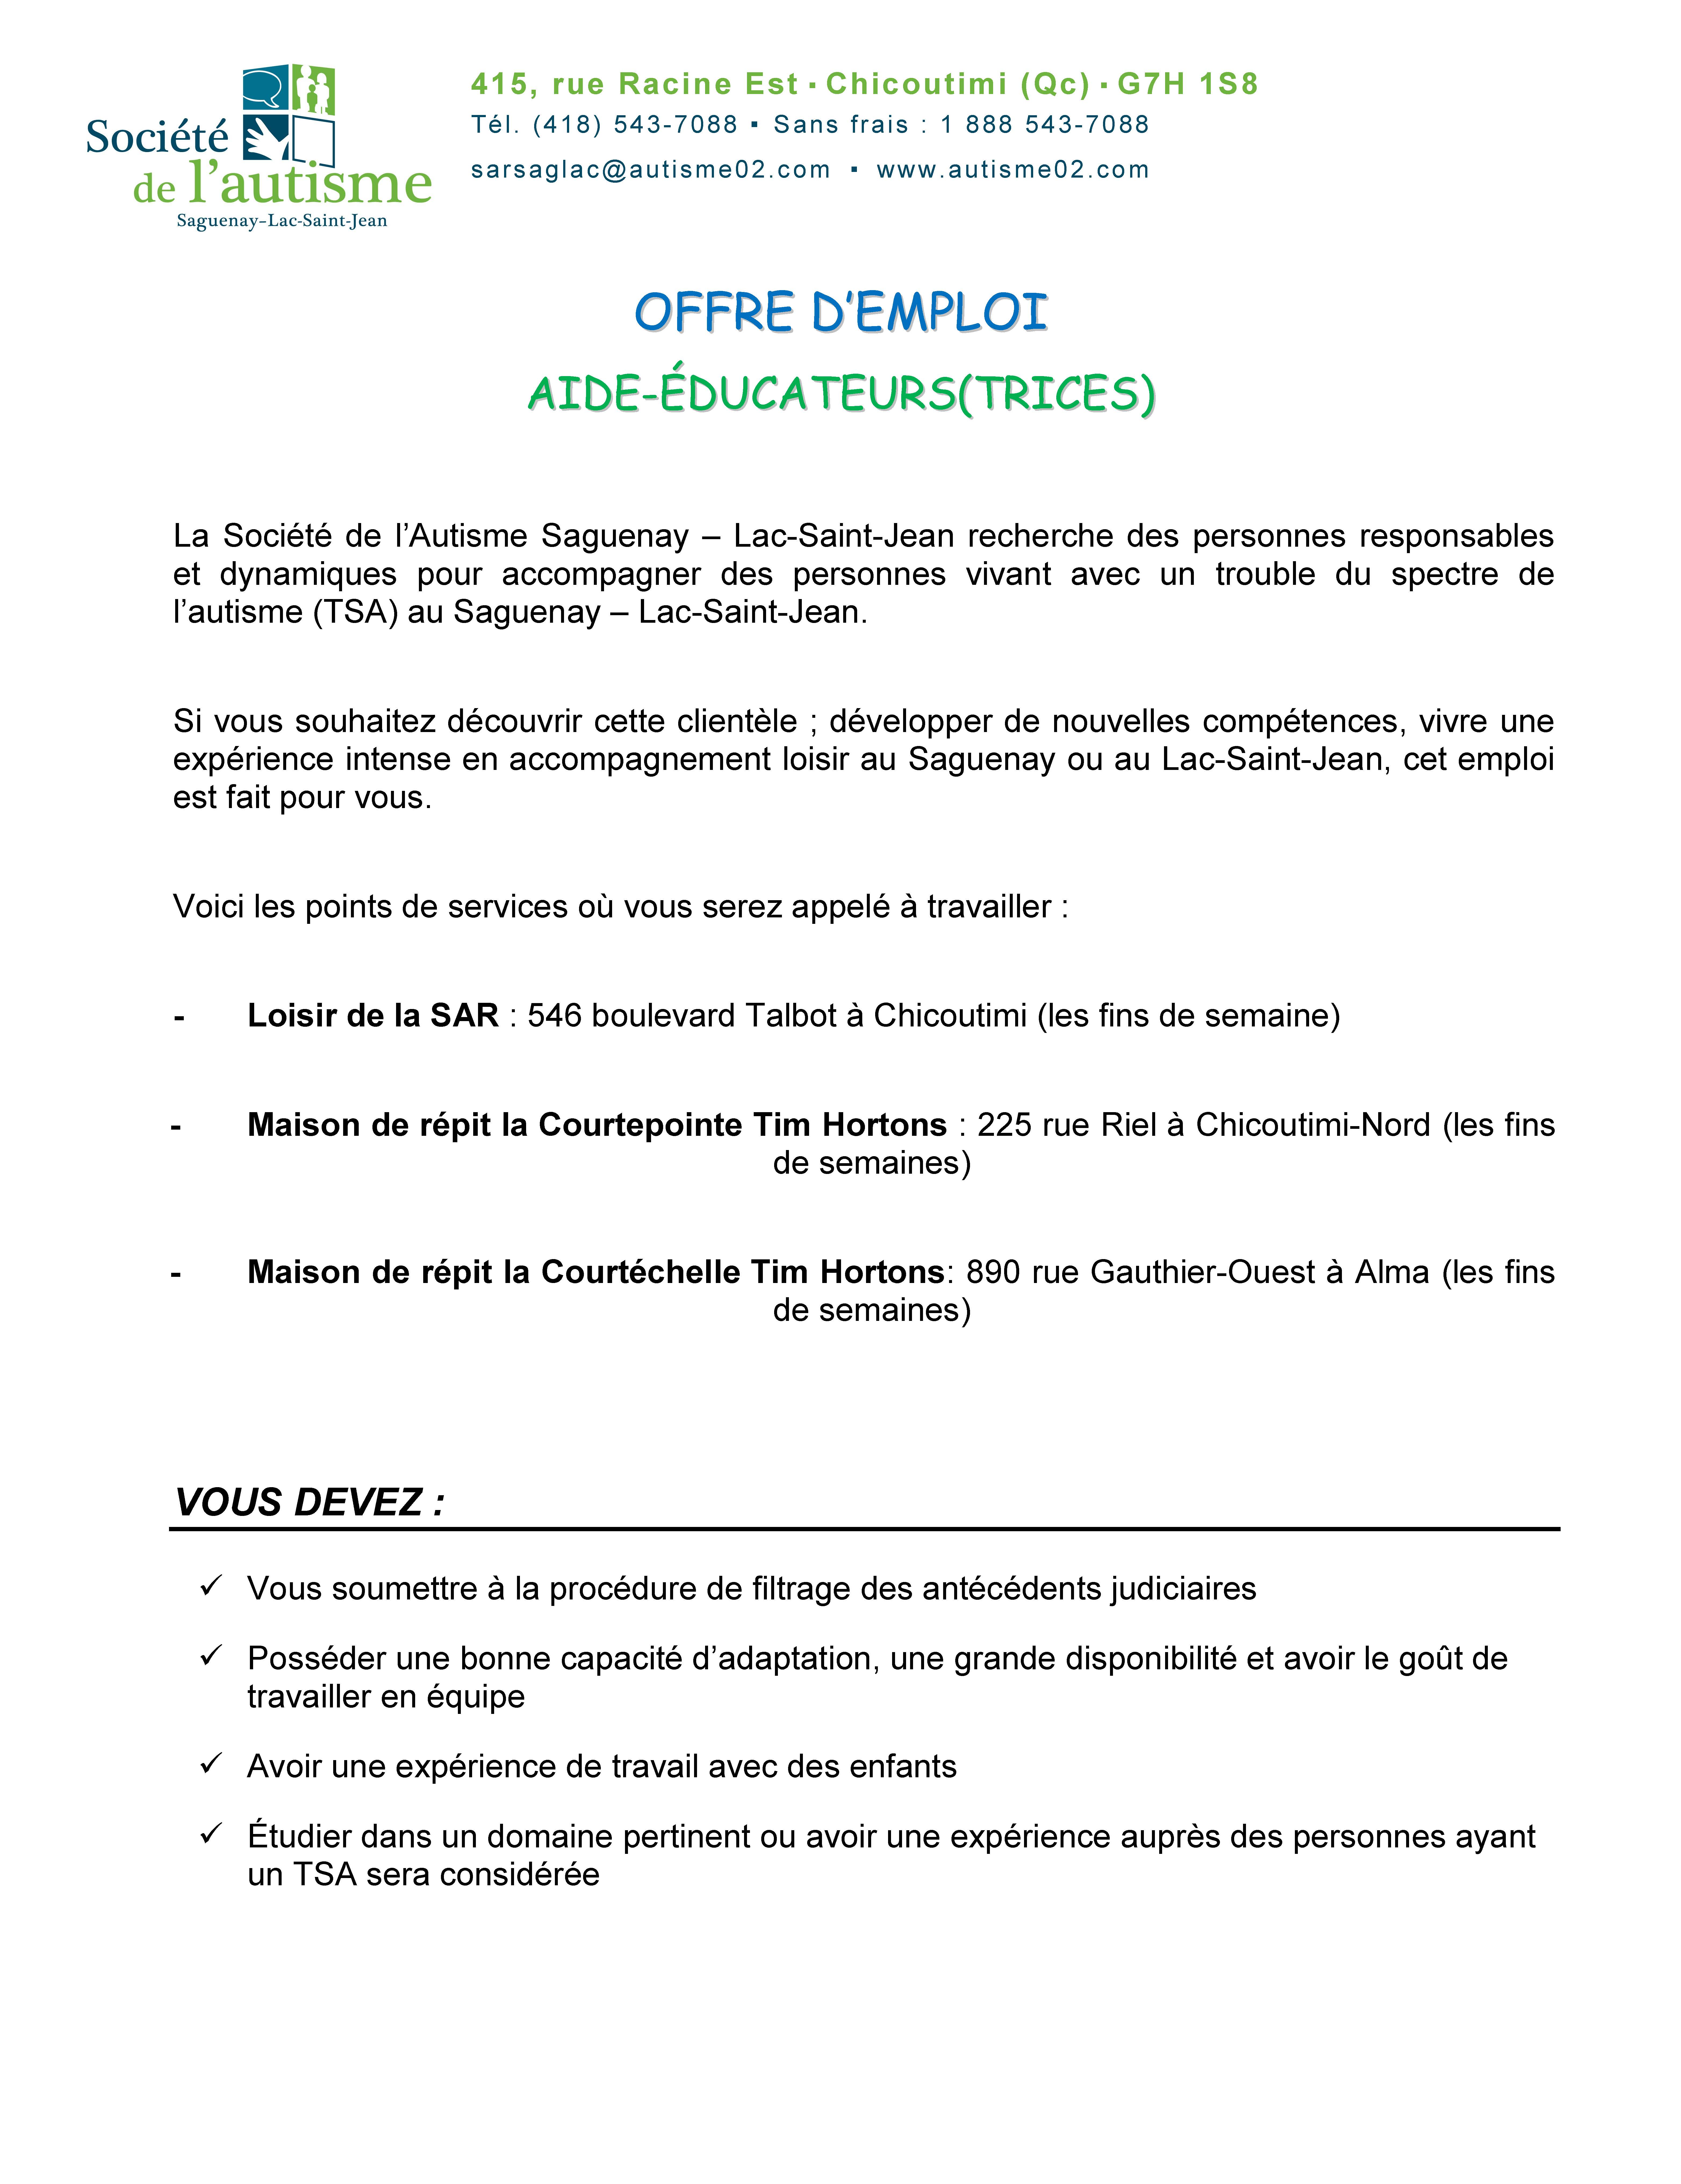 Offre demploi 2019 2020 AE Page 1